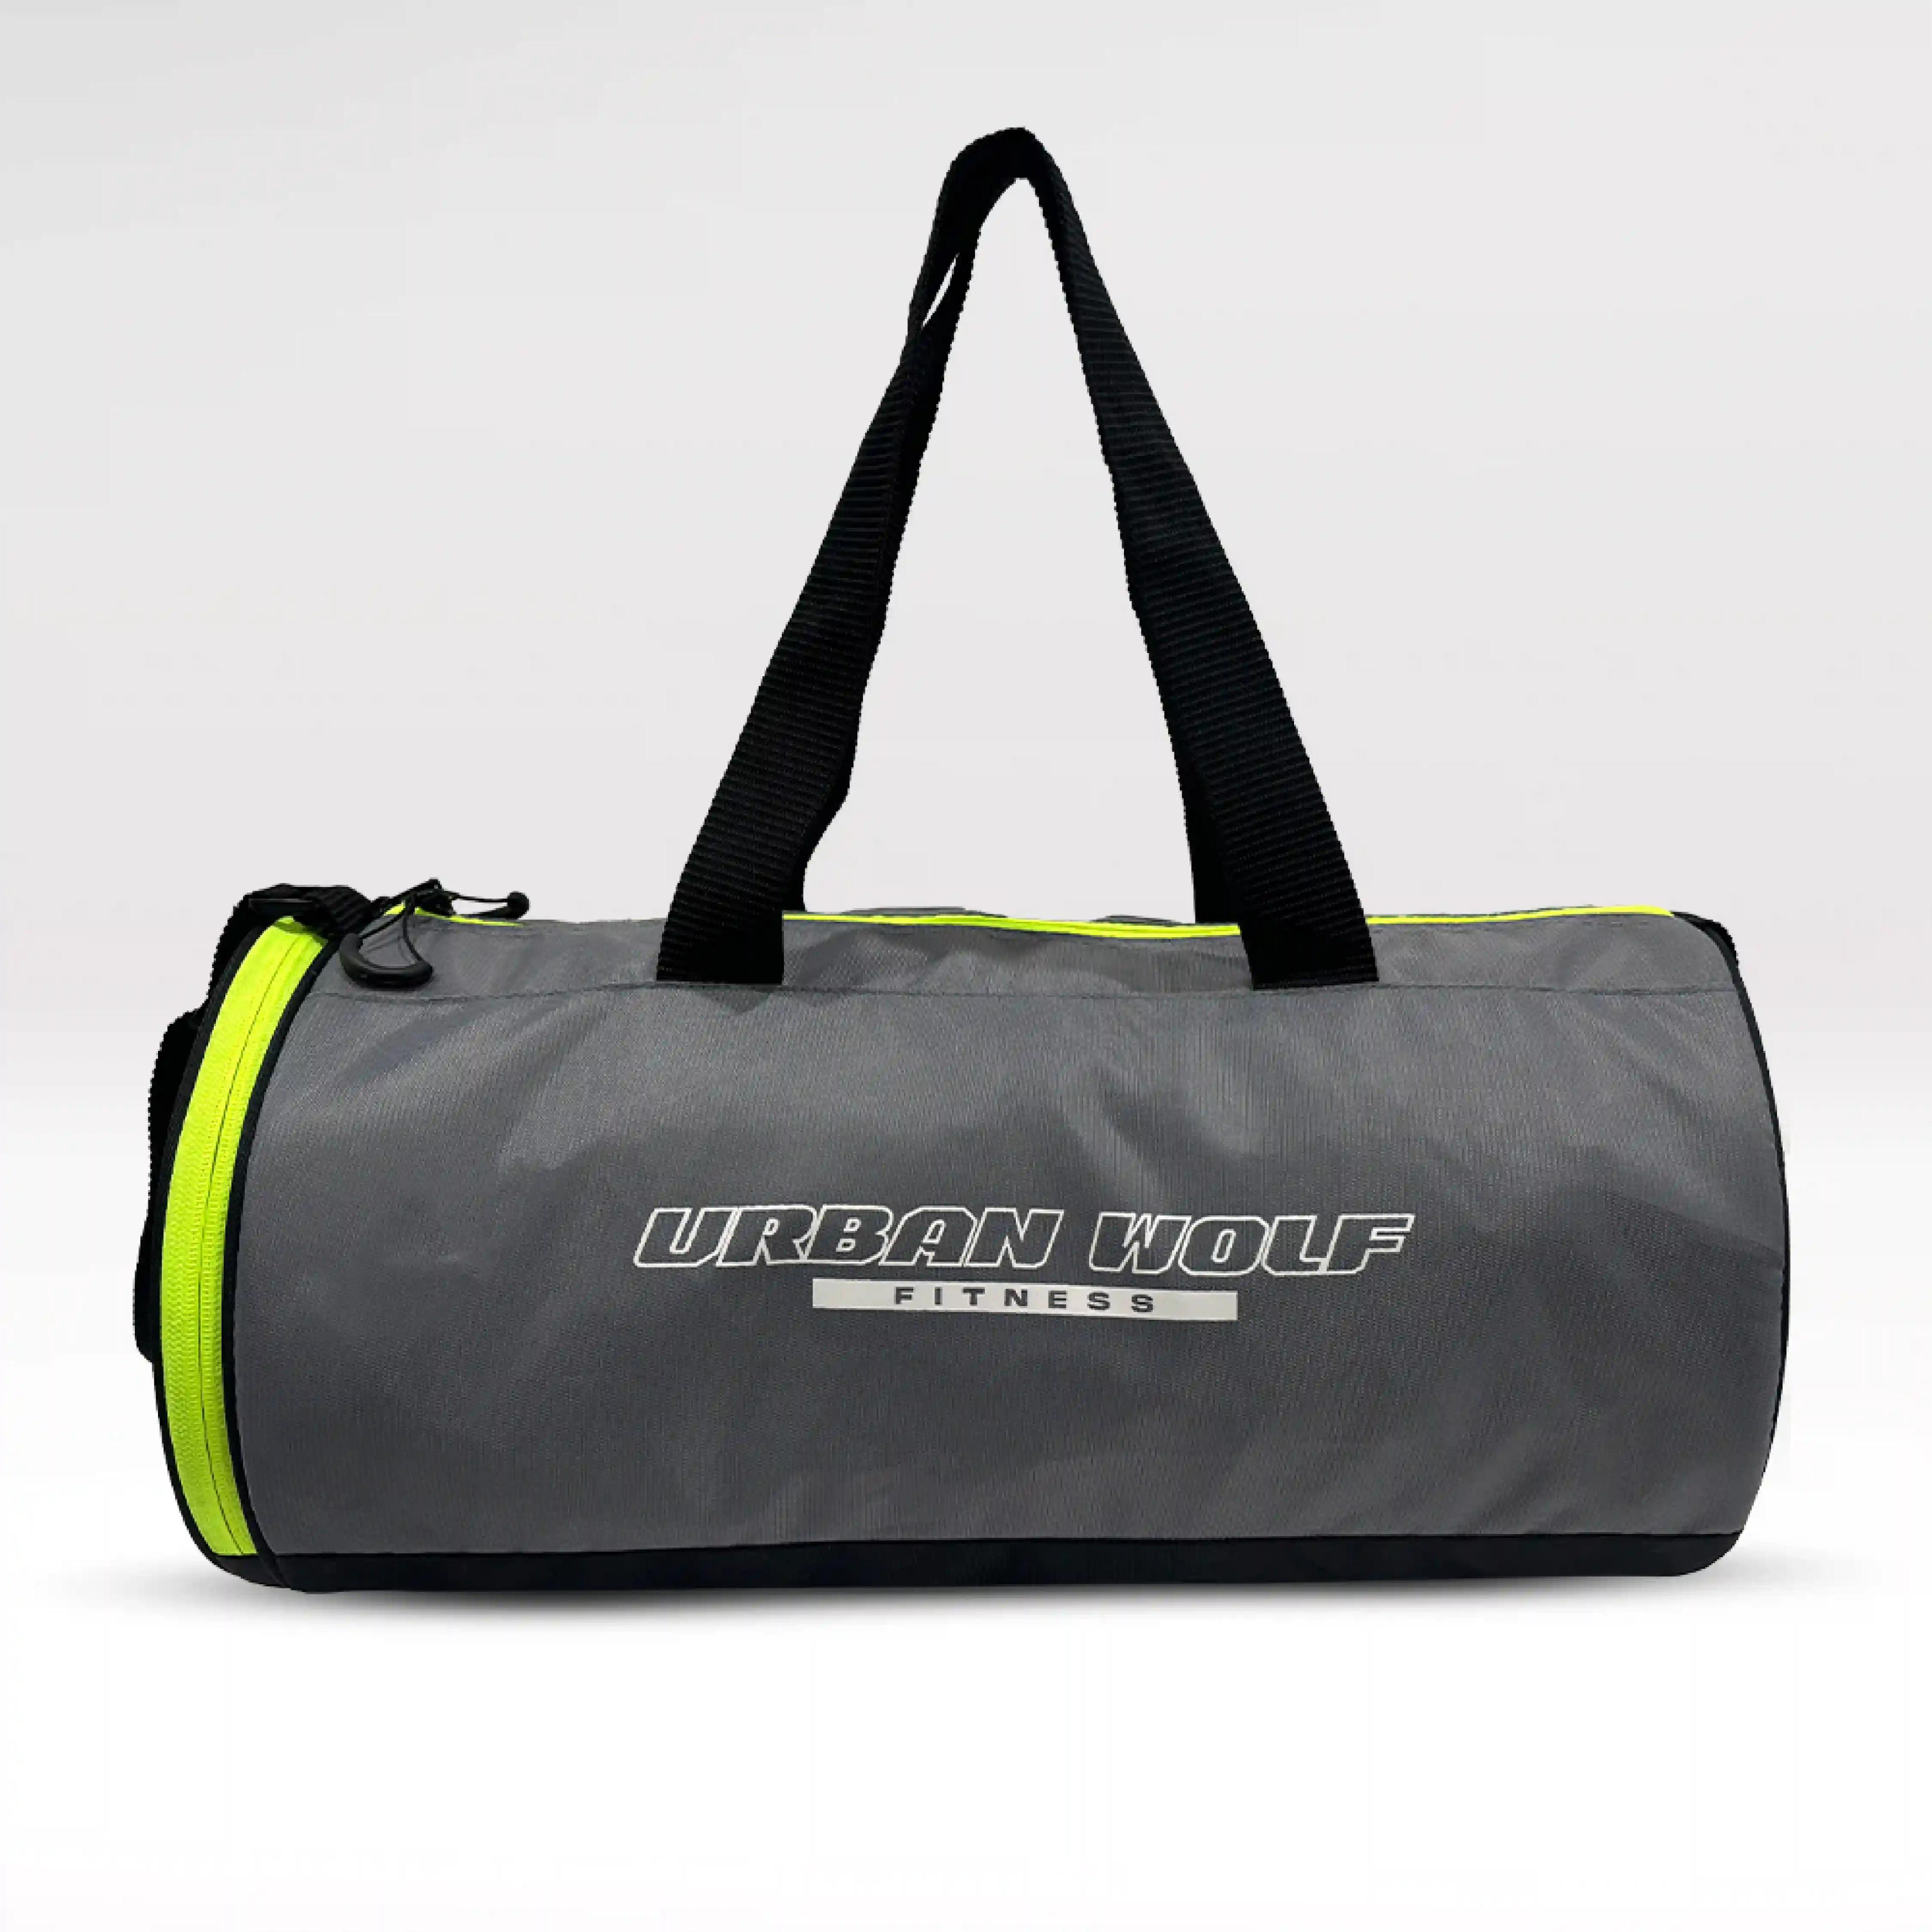 Urban Wolf 26L Gym Duffle Bag | Separate Shoe Compartment | Quick Access Pocket | Durable Polyester | Multi-Functional Sports & Travel Bag | Dimensions 49x23x23 cm